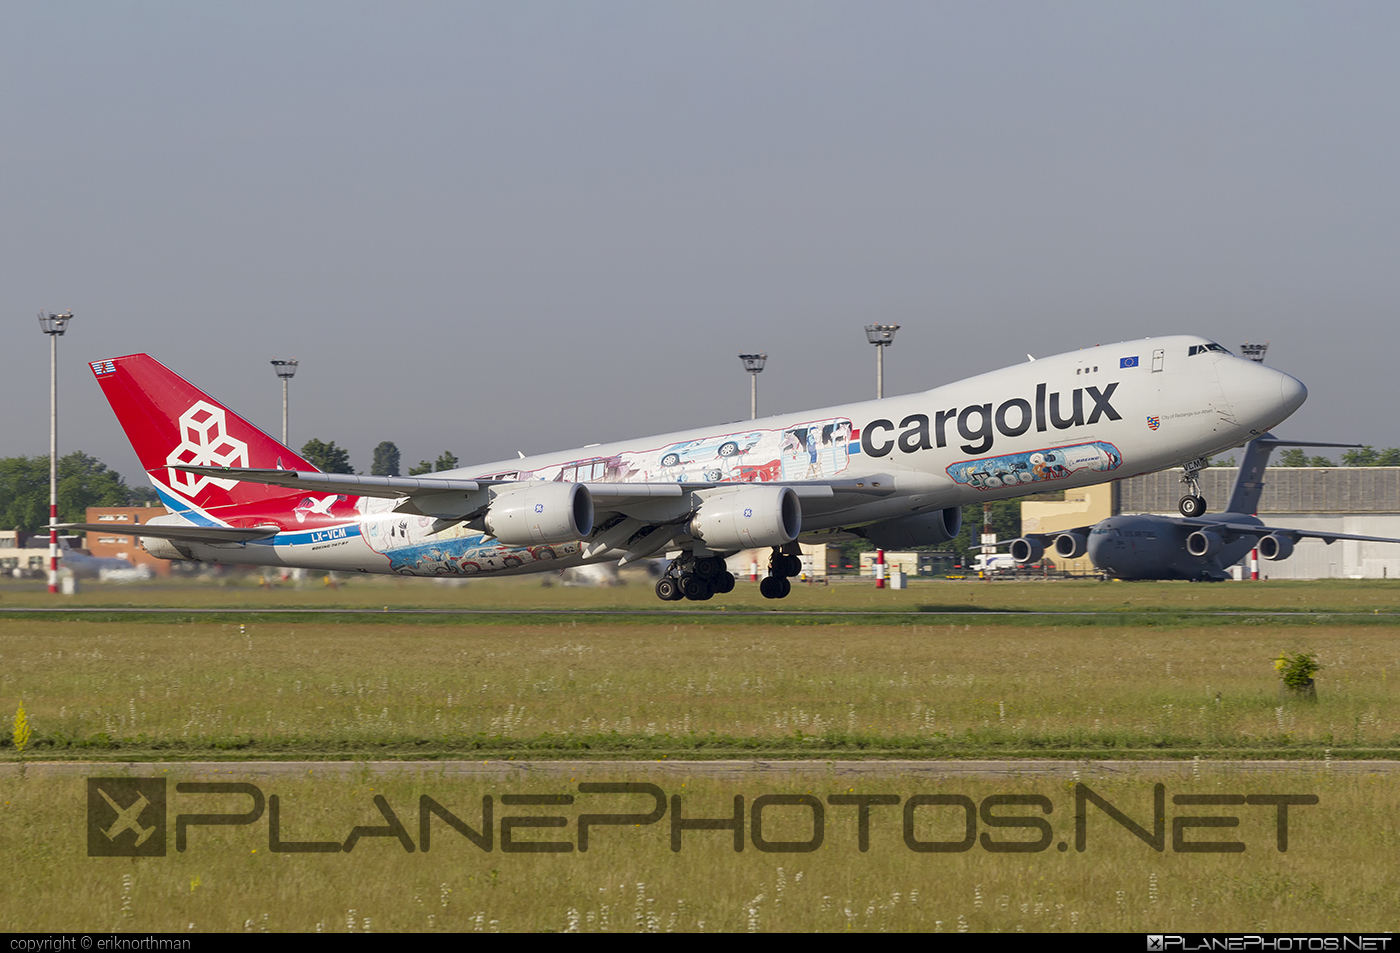 Boeing 747-8F - LX-VCM operated by Cargolux Airlines International #b747 #b747f #b747freighter #boeing #boeing747 #cargolux #jumbo